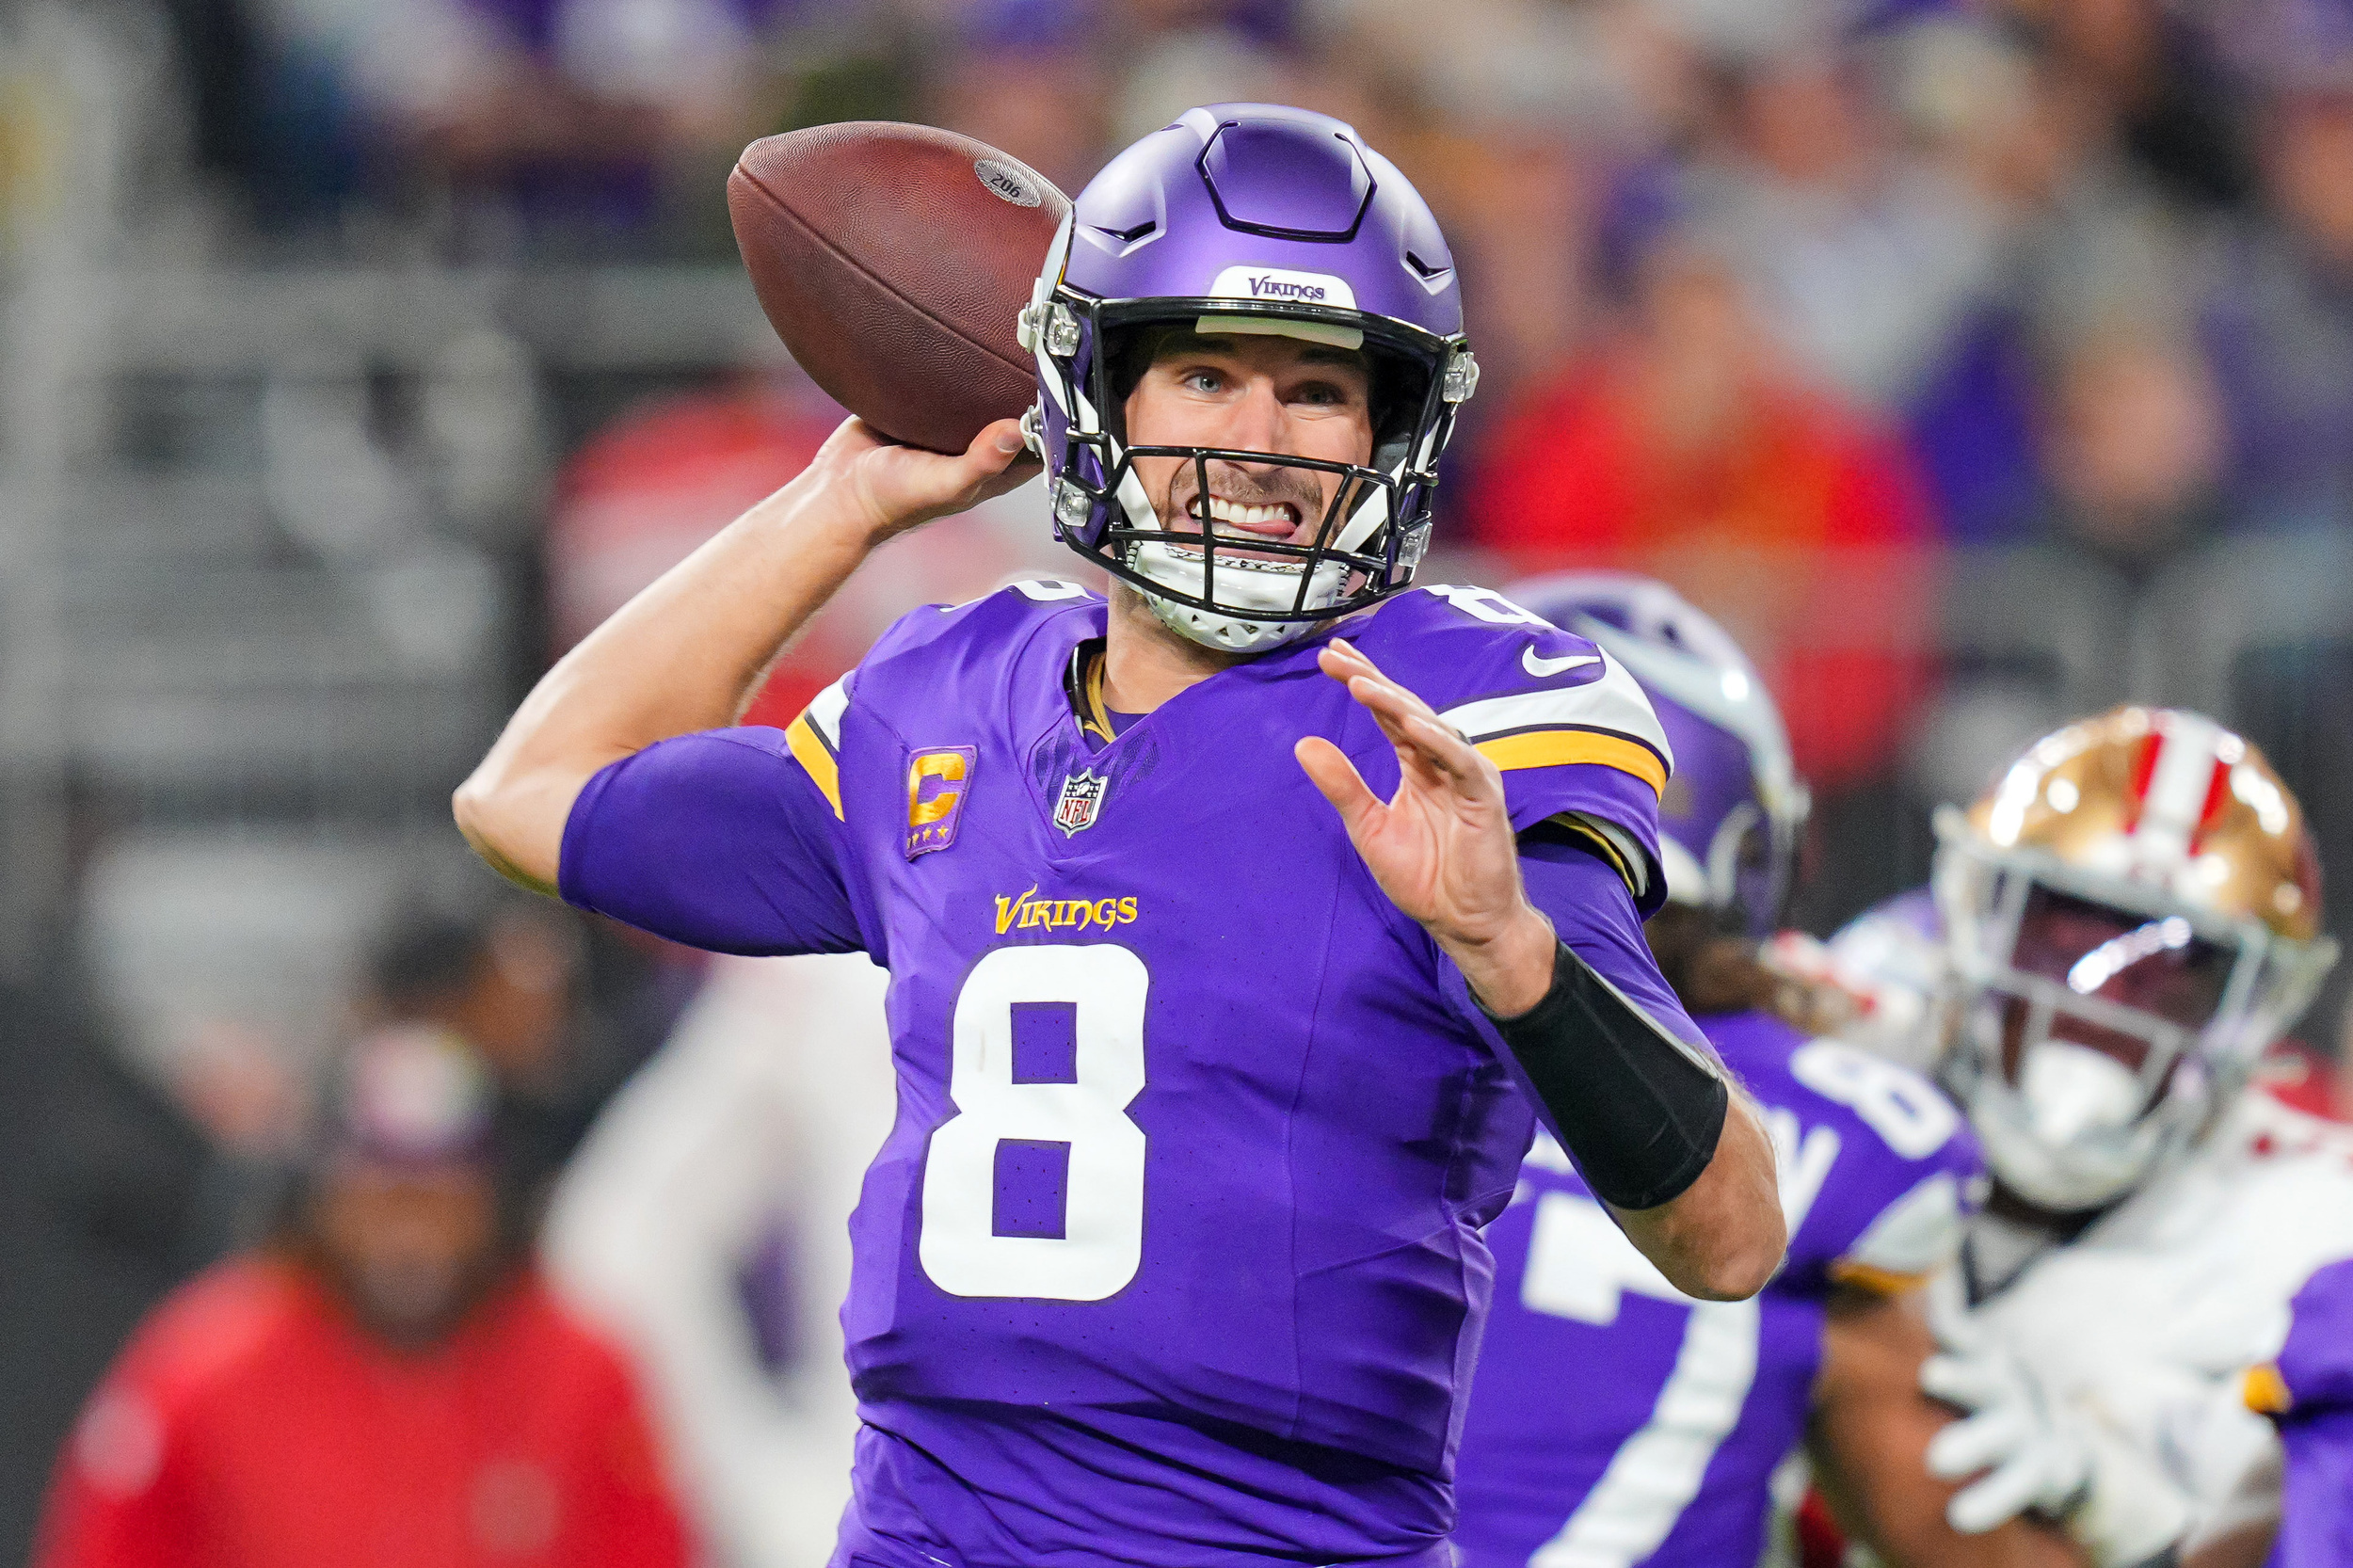 report: vikings want to re-sign kirk cousins but will consider other options